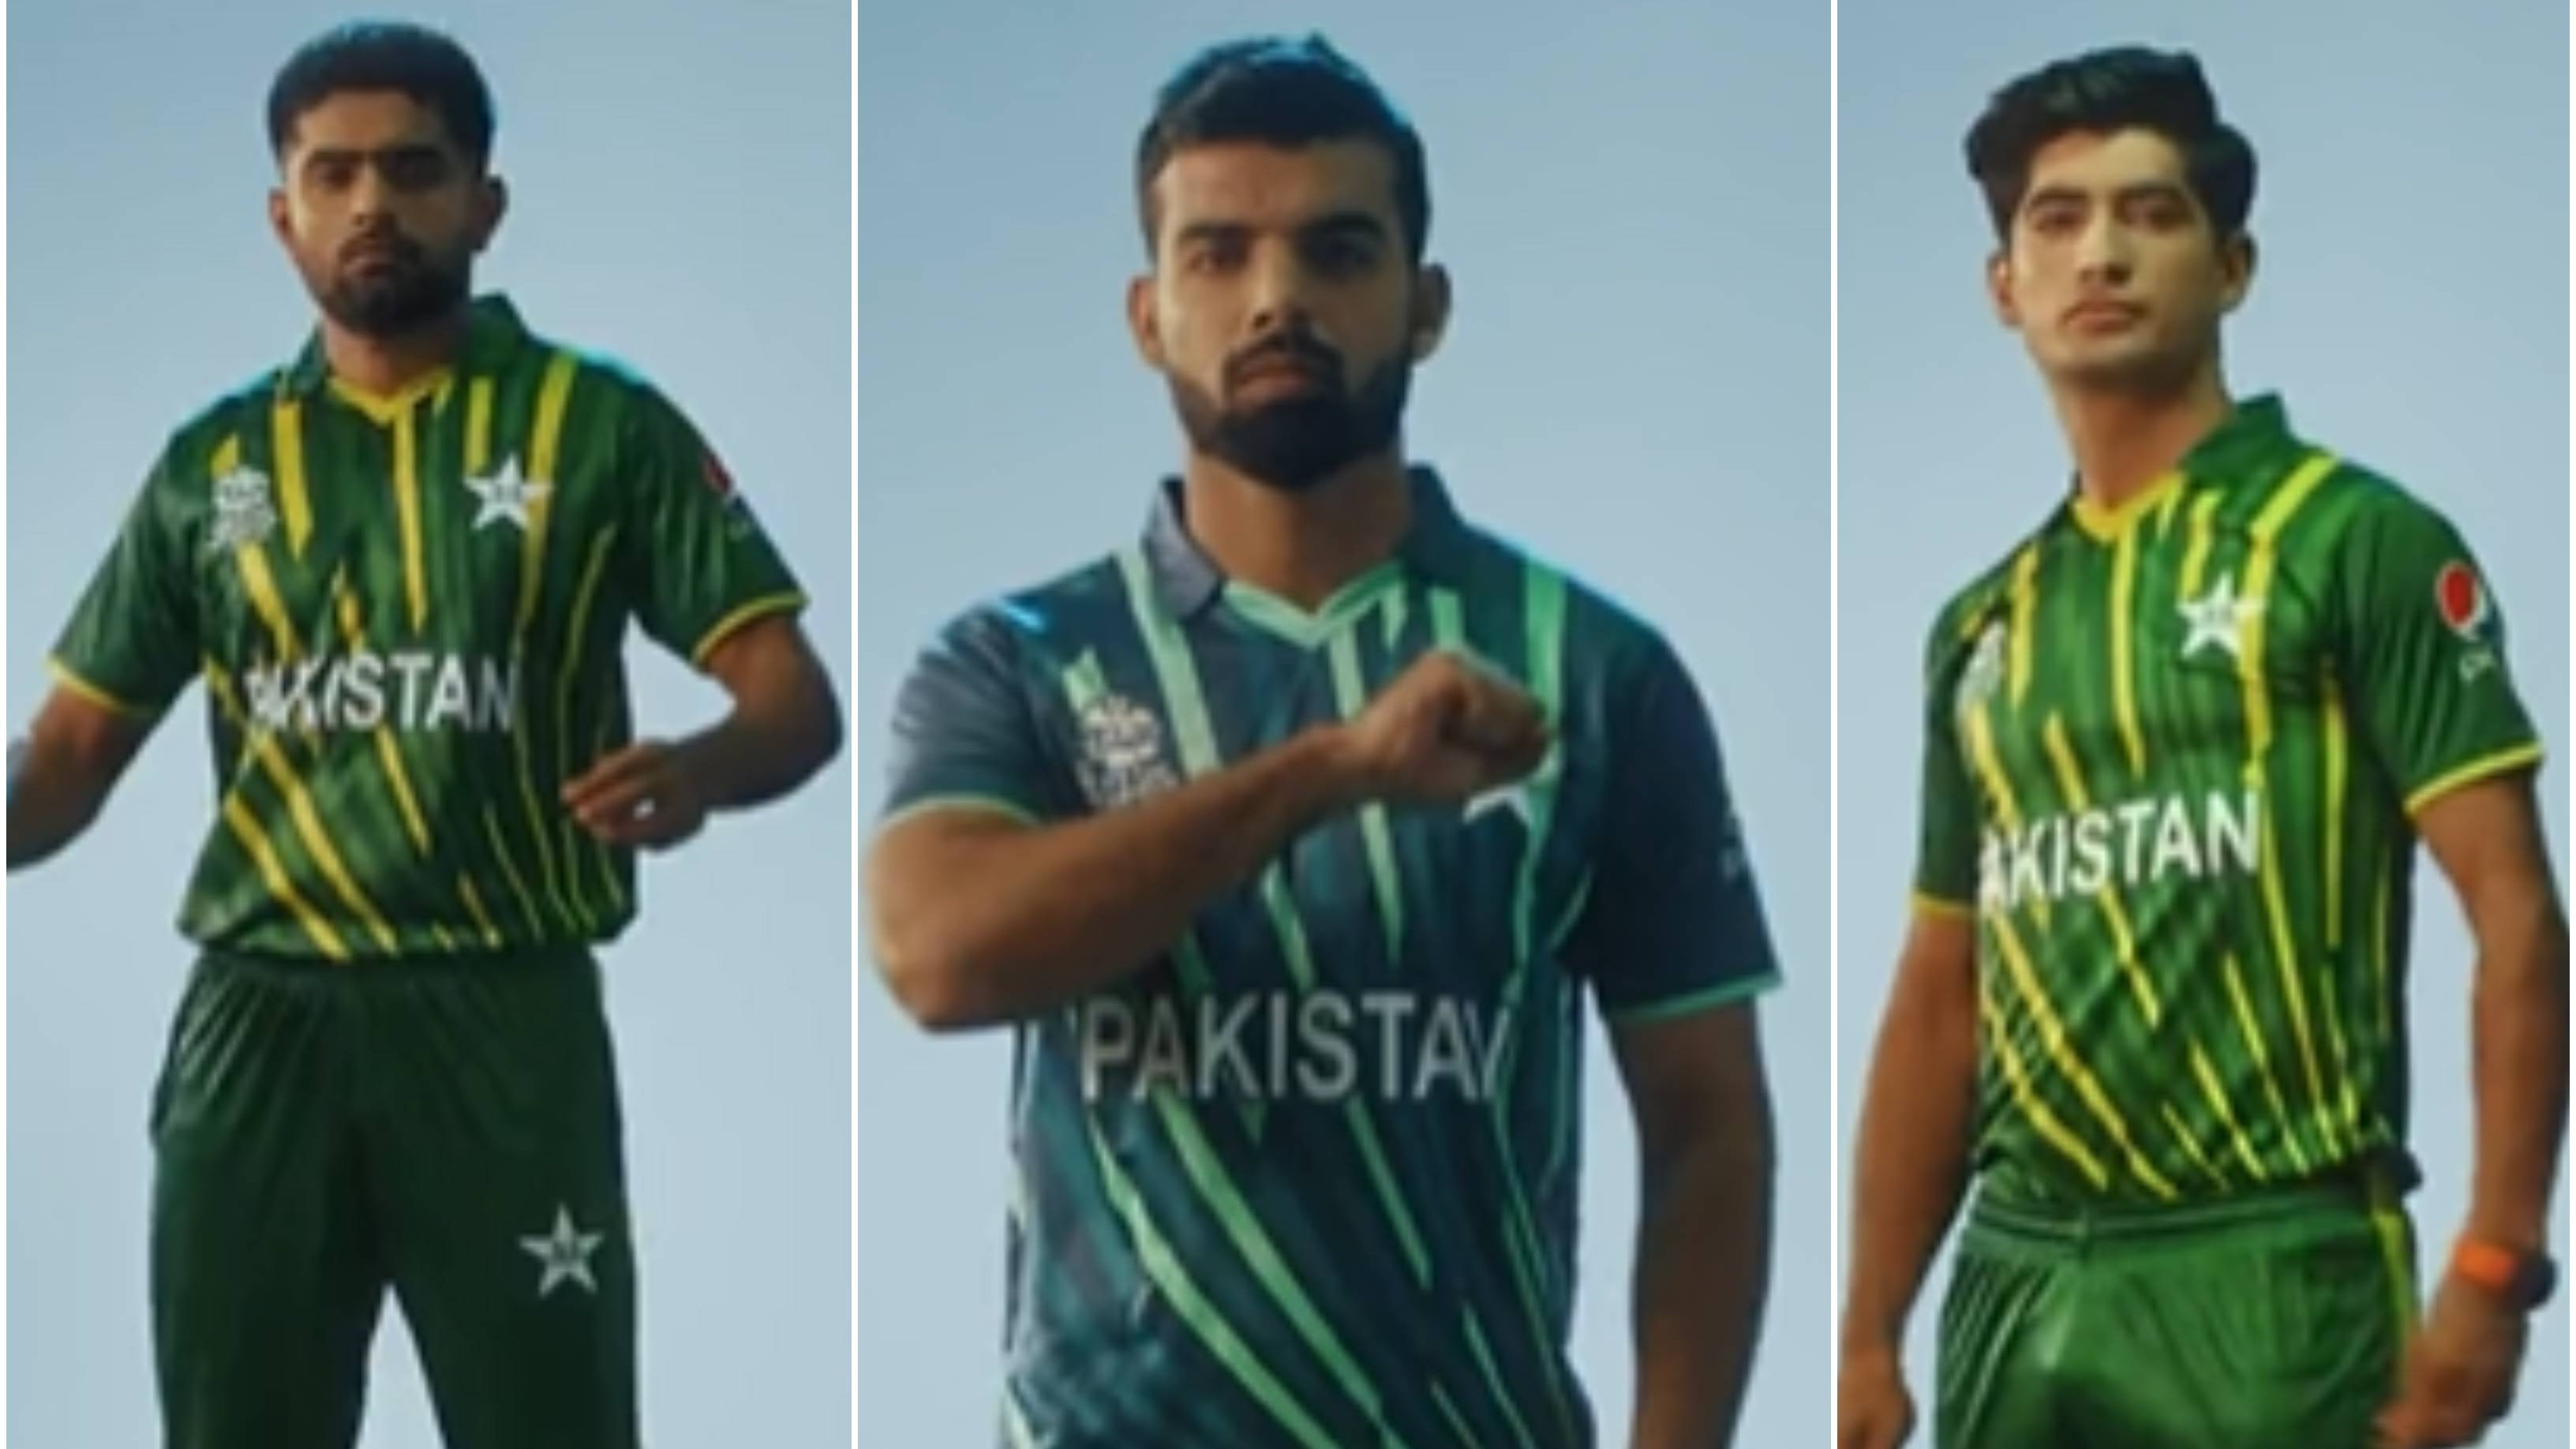 WATCH: PCB unveils Pakistan cricket team’s new jersey ahead of T20 World Cup 2022